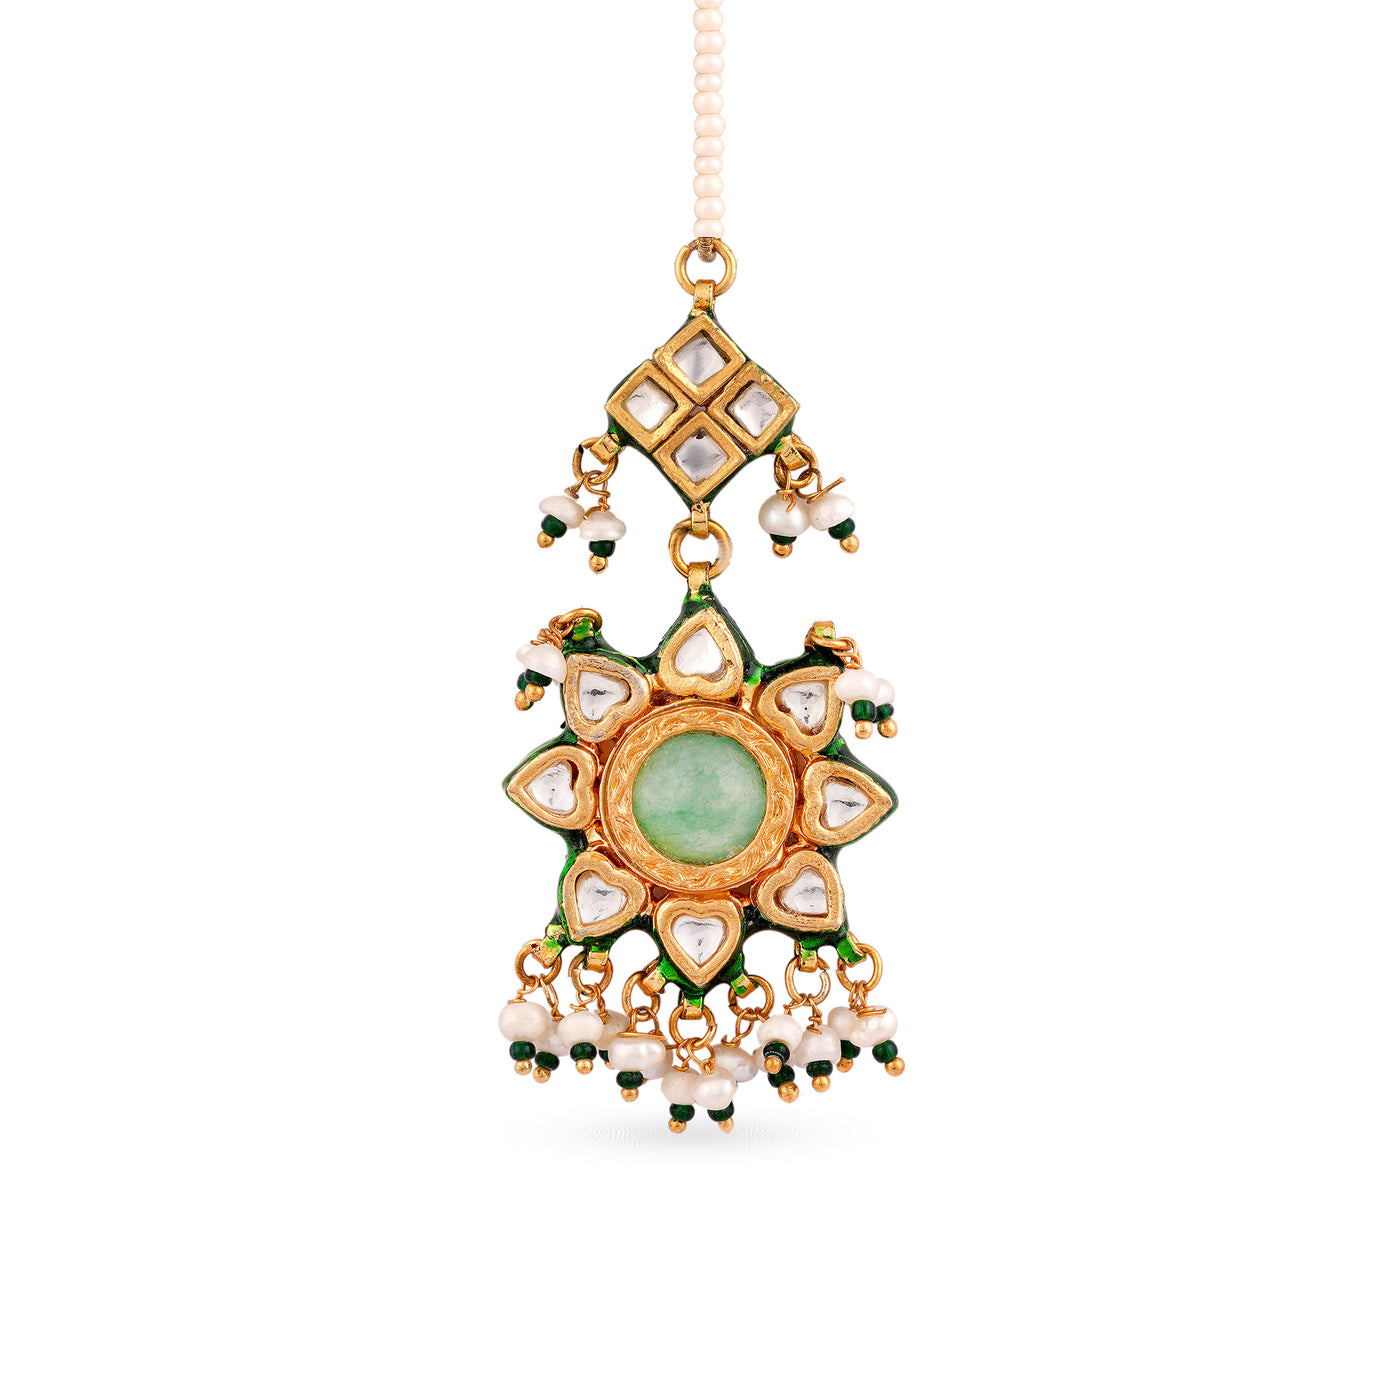 This gorgeous gold plated silver mix base maang tikka with flourite center stone and real pearls is pure elegance. 